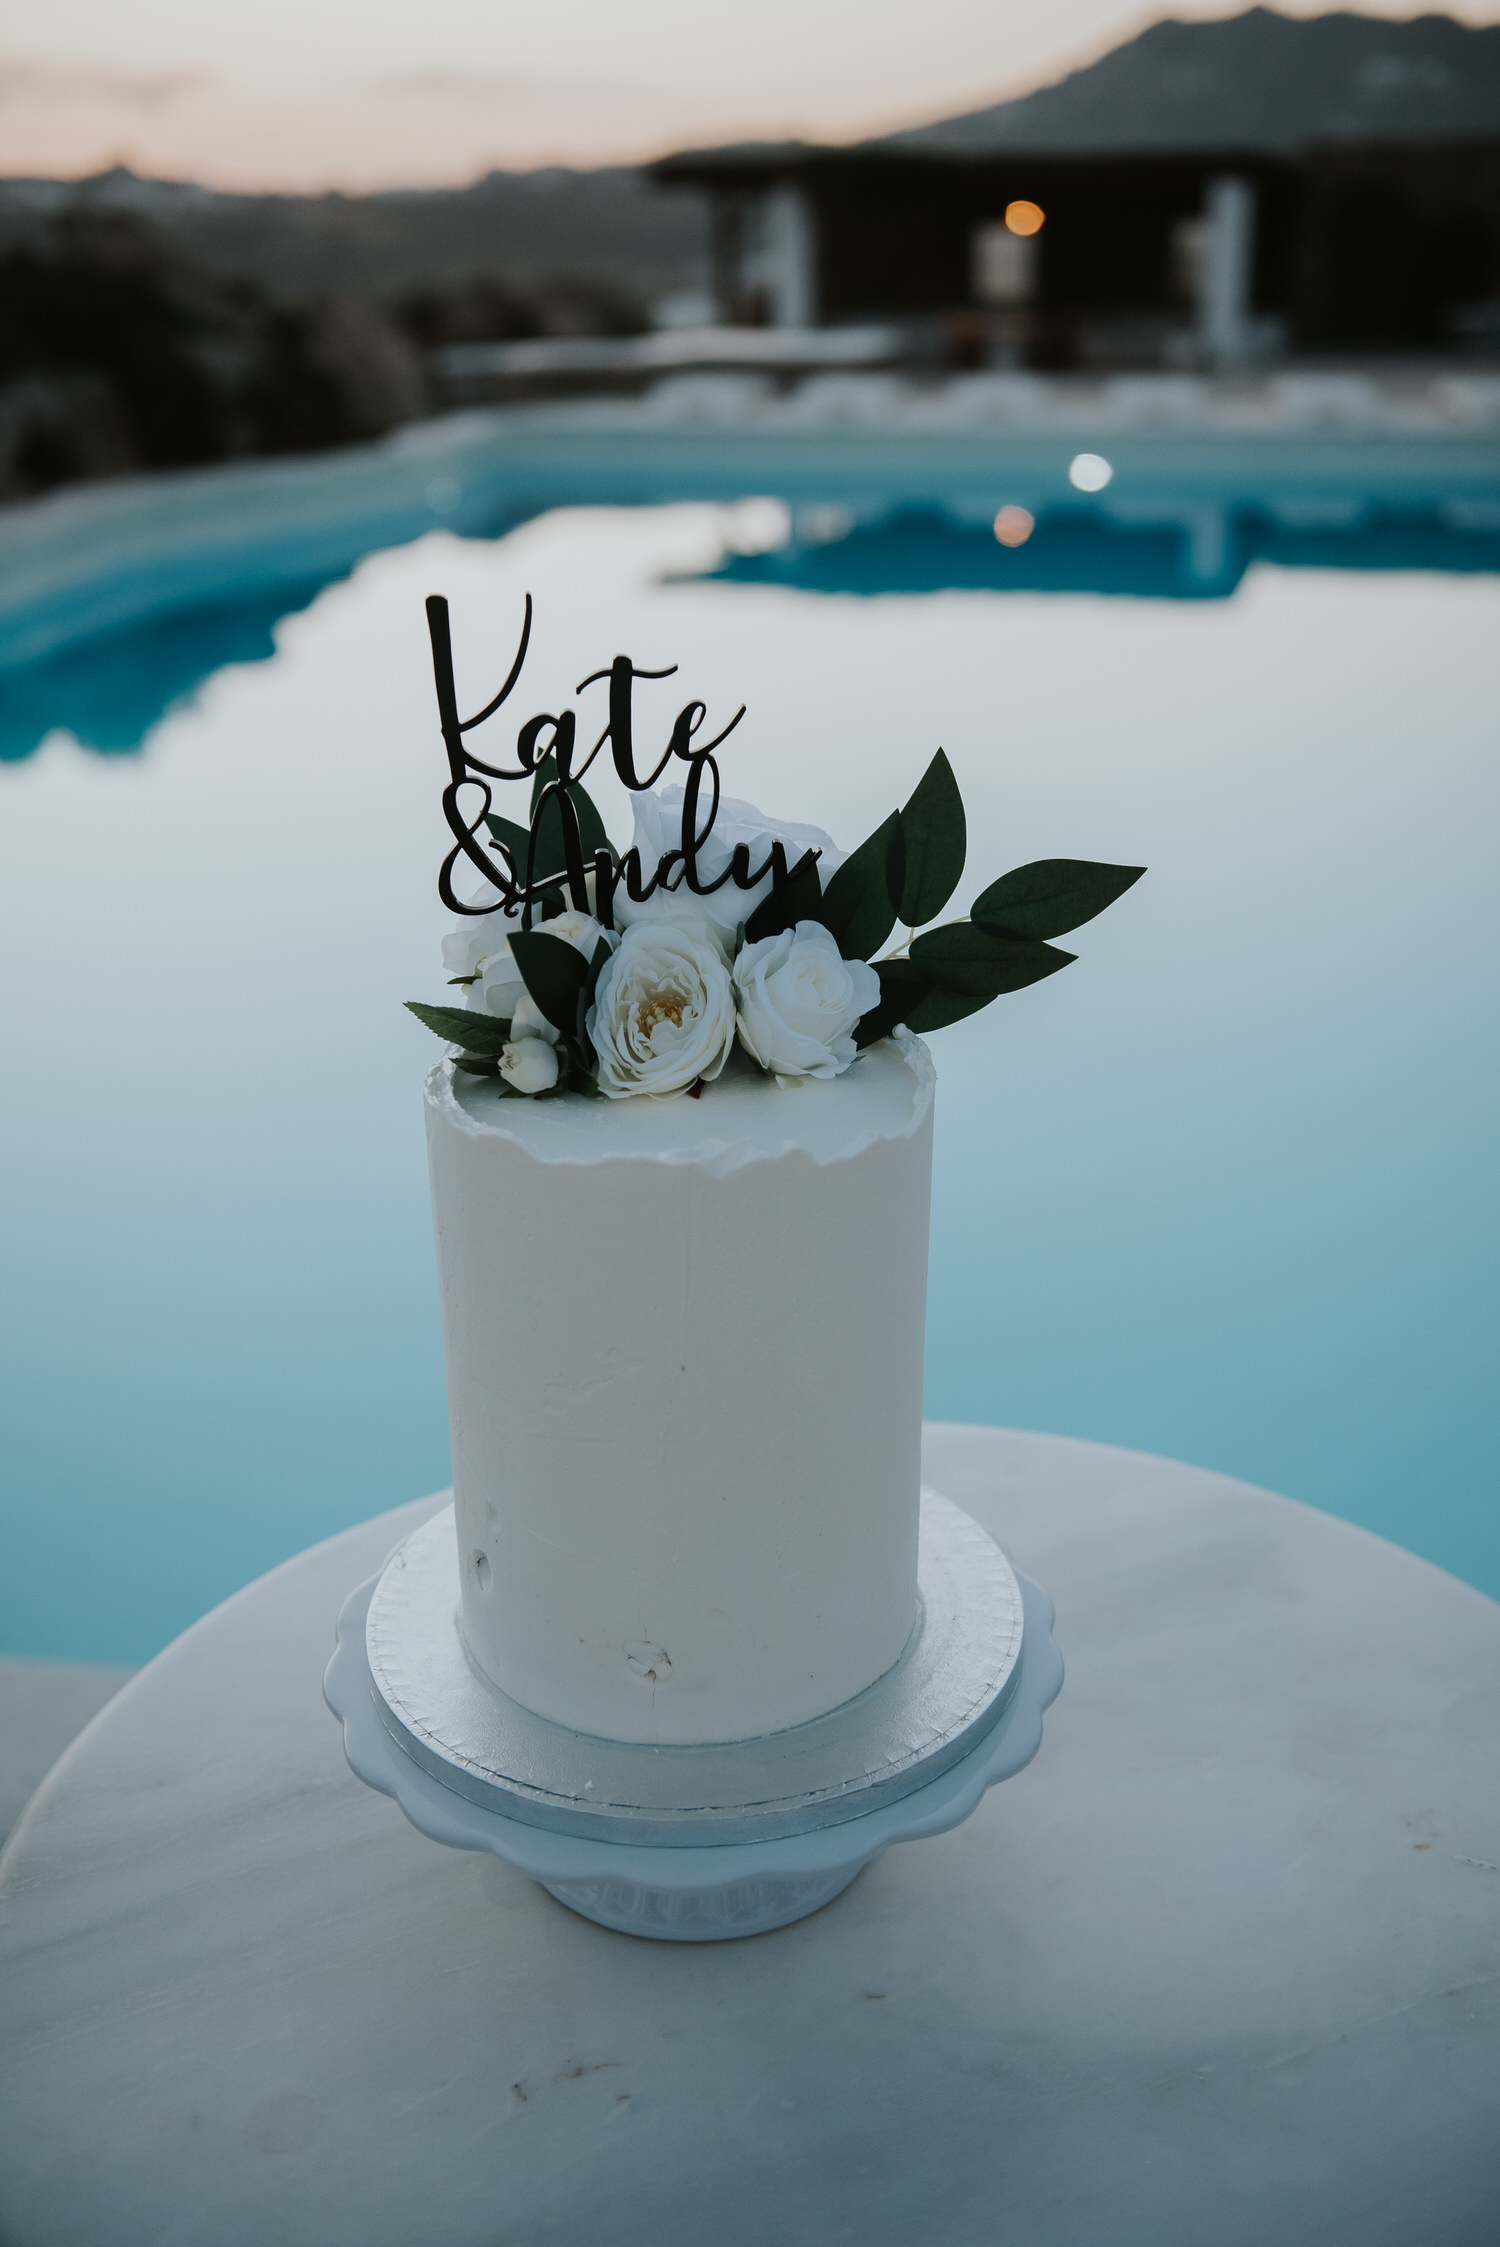 Mykonos wedding photographer: close up of wedding cake with bride and groom's fingerprints next to turquoise swimming pool on their Mykonos wedding.